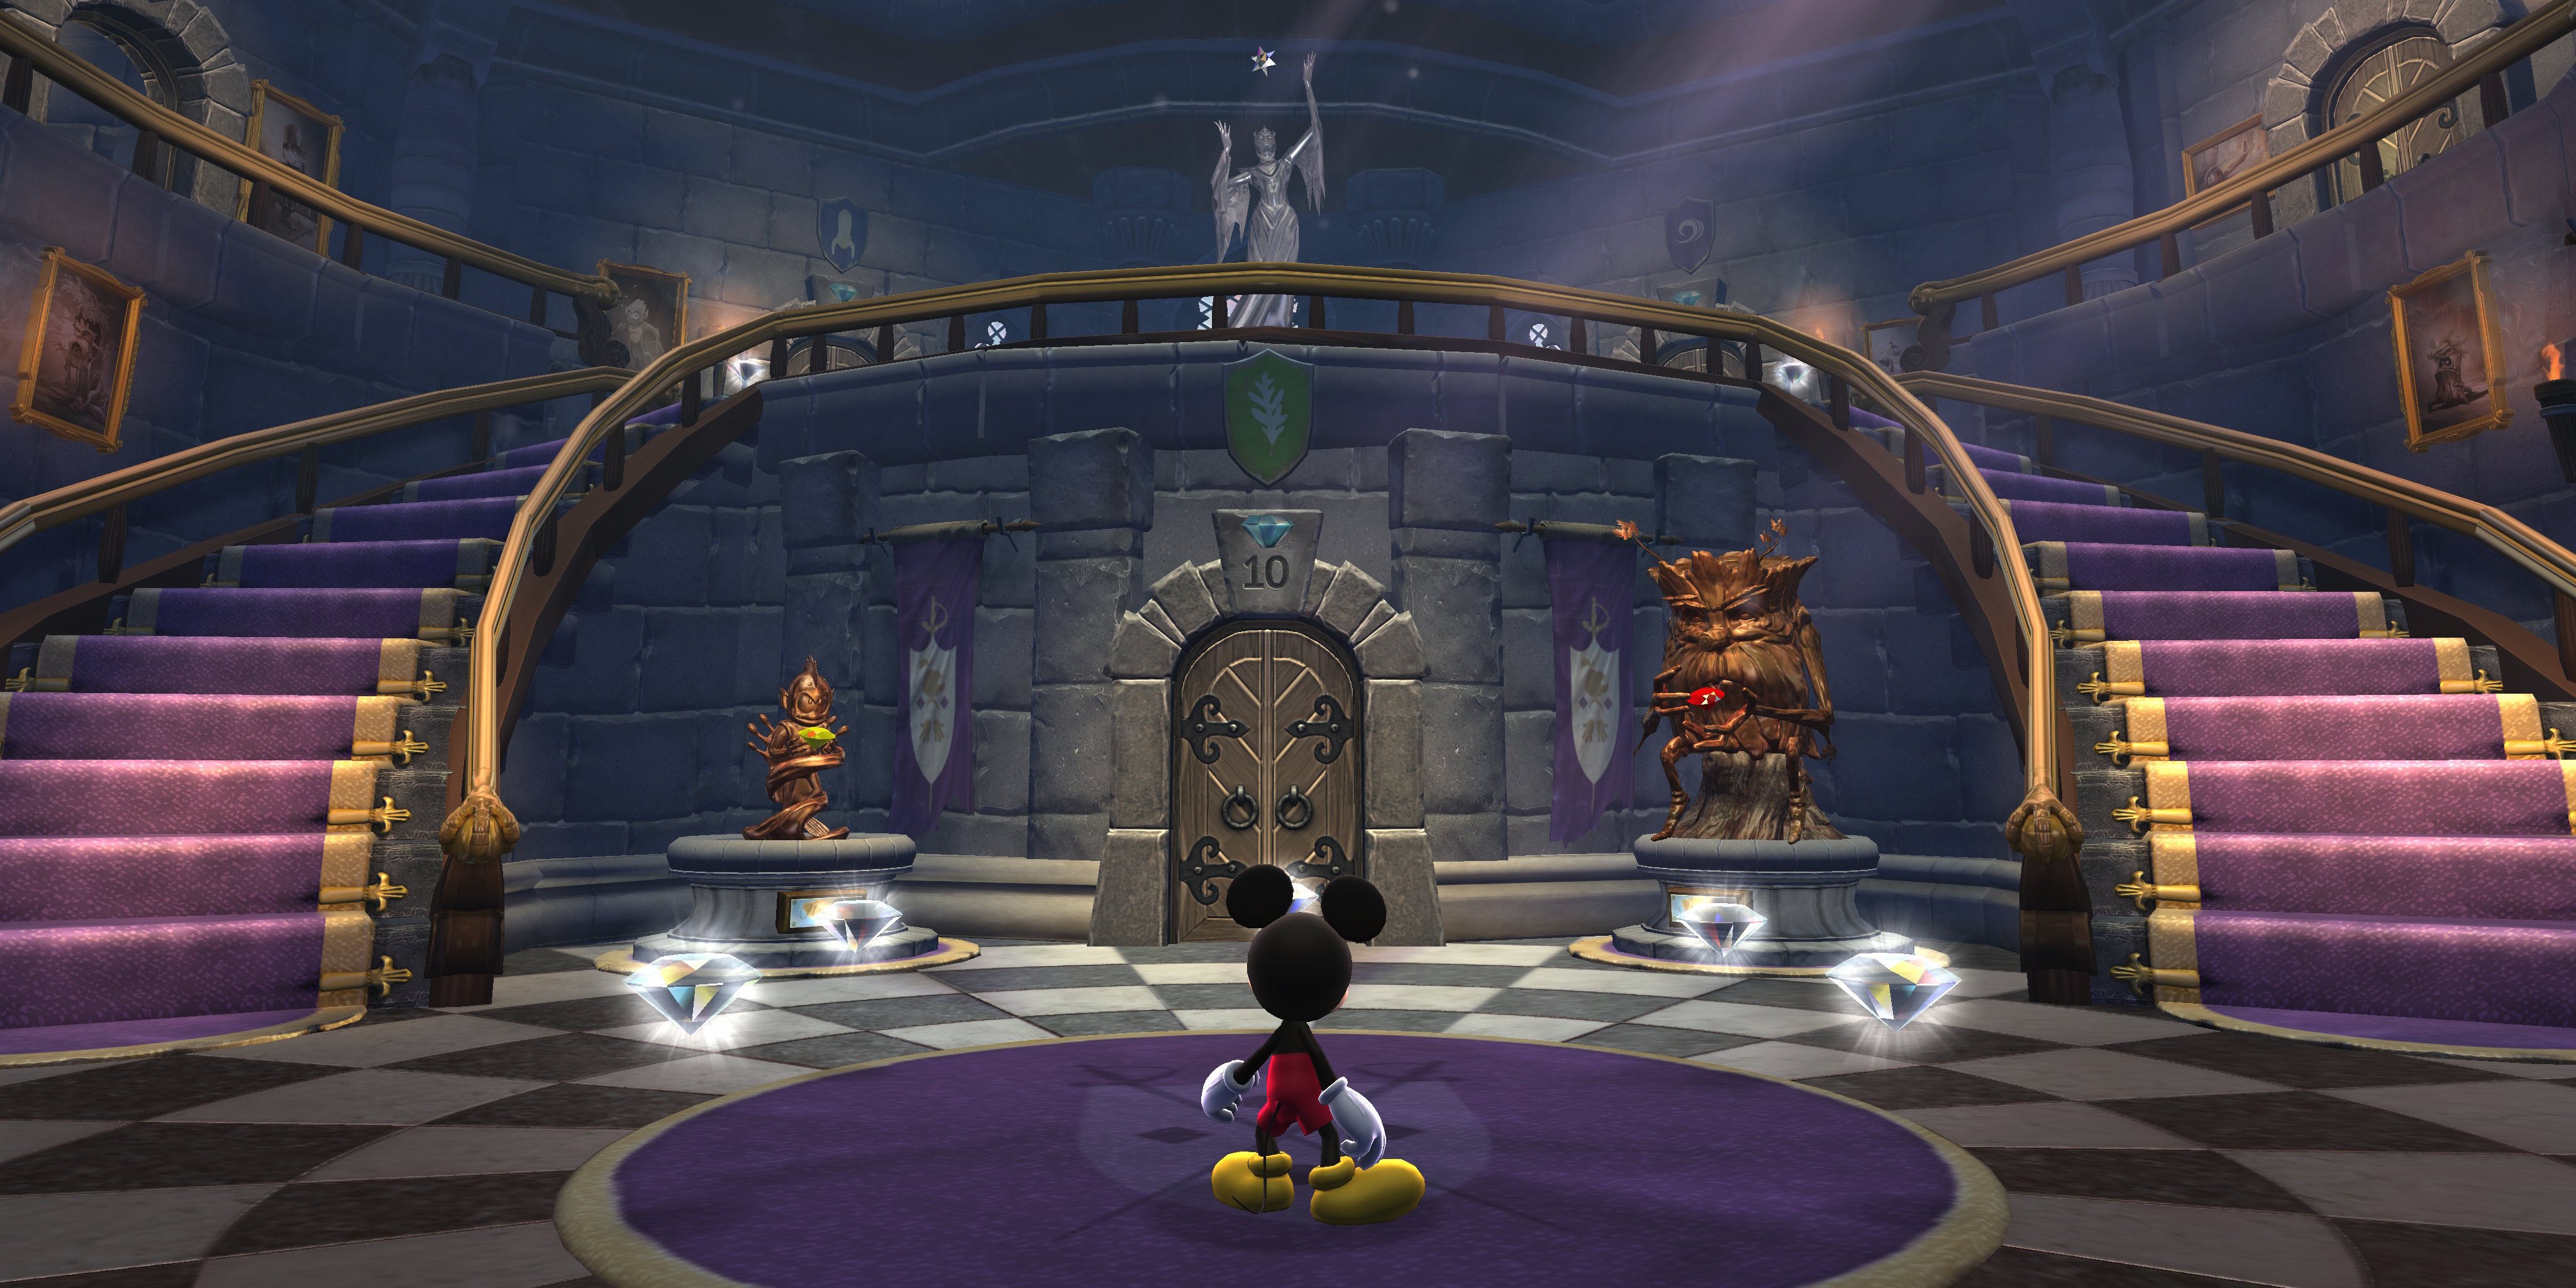 disney castle of illusion starring mickey mouse